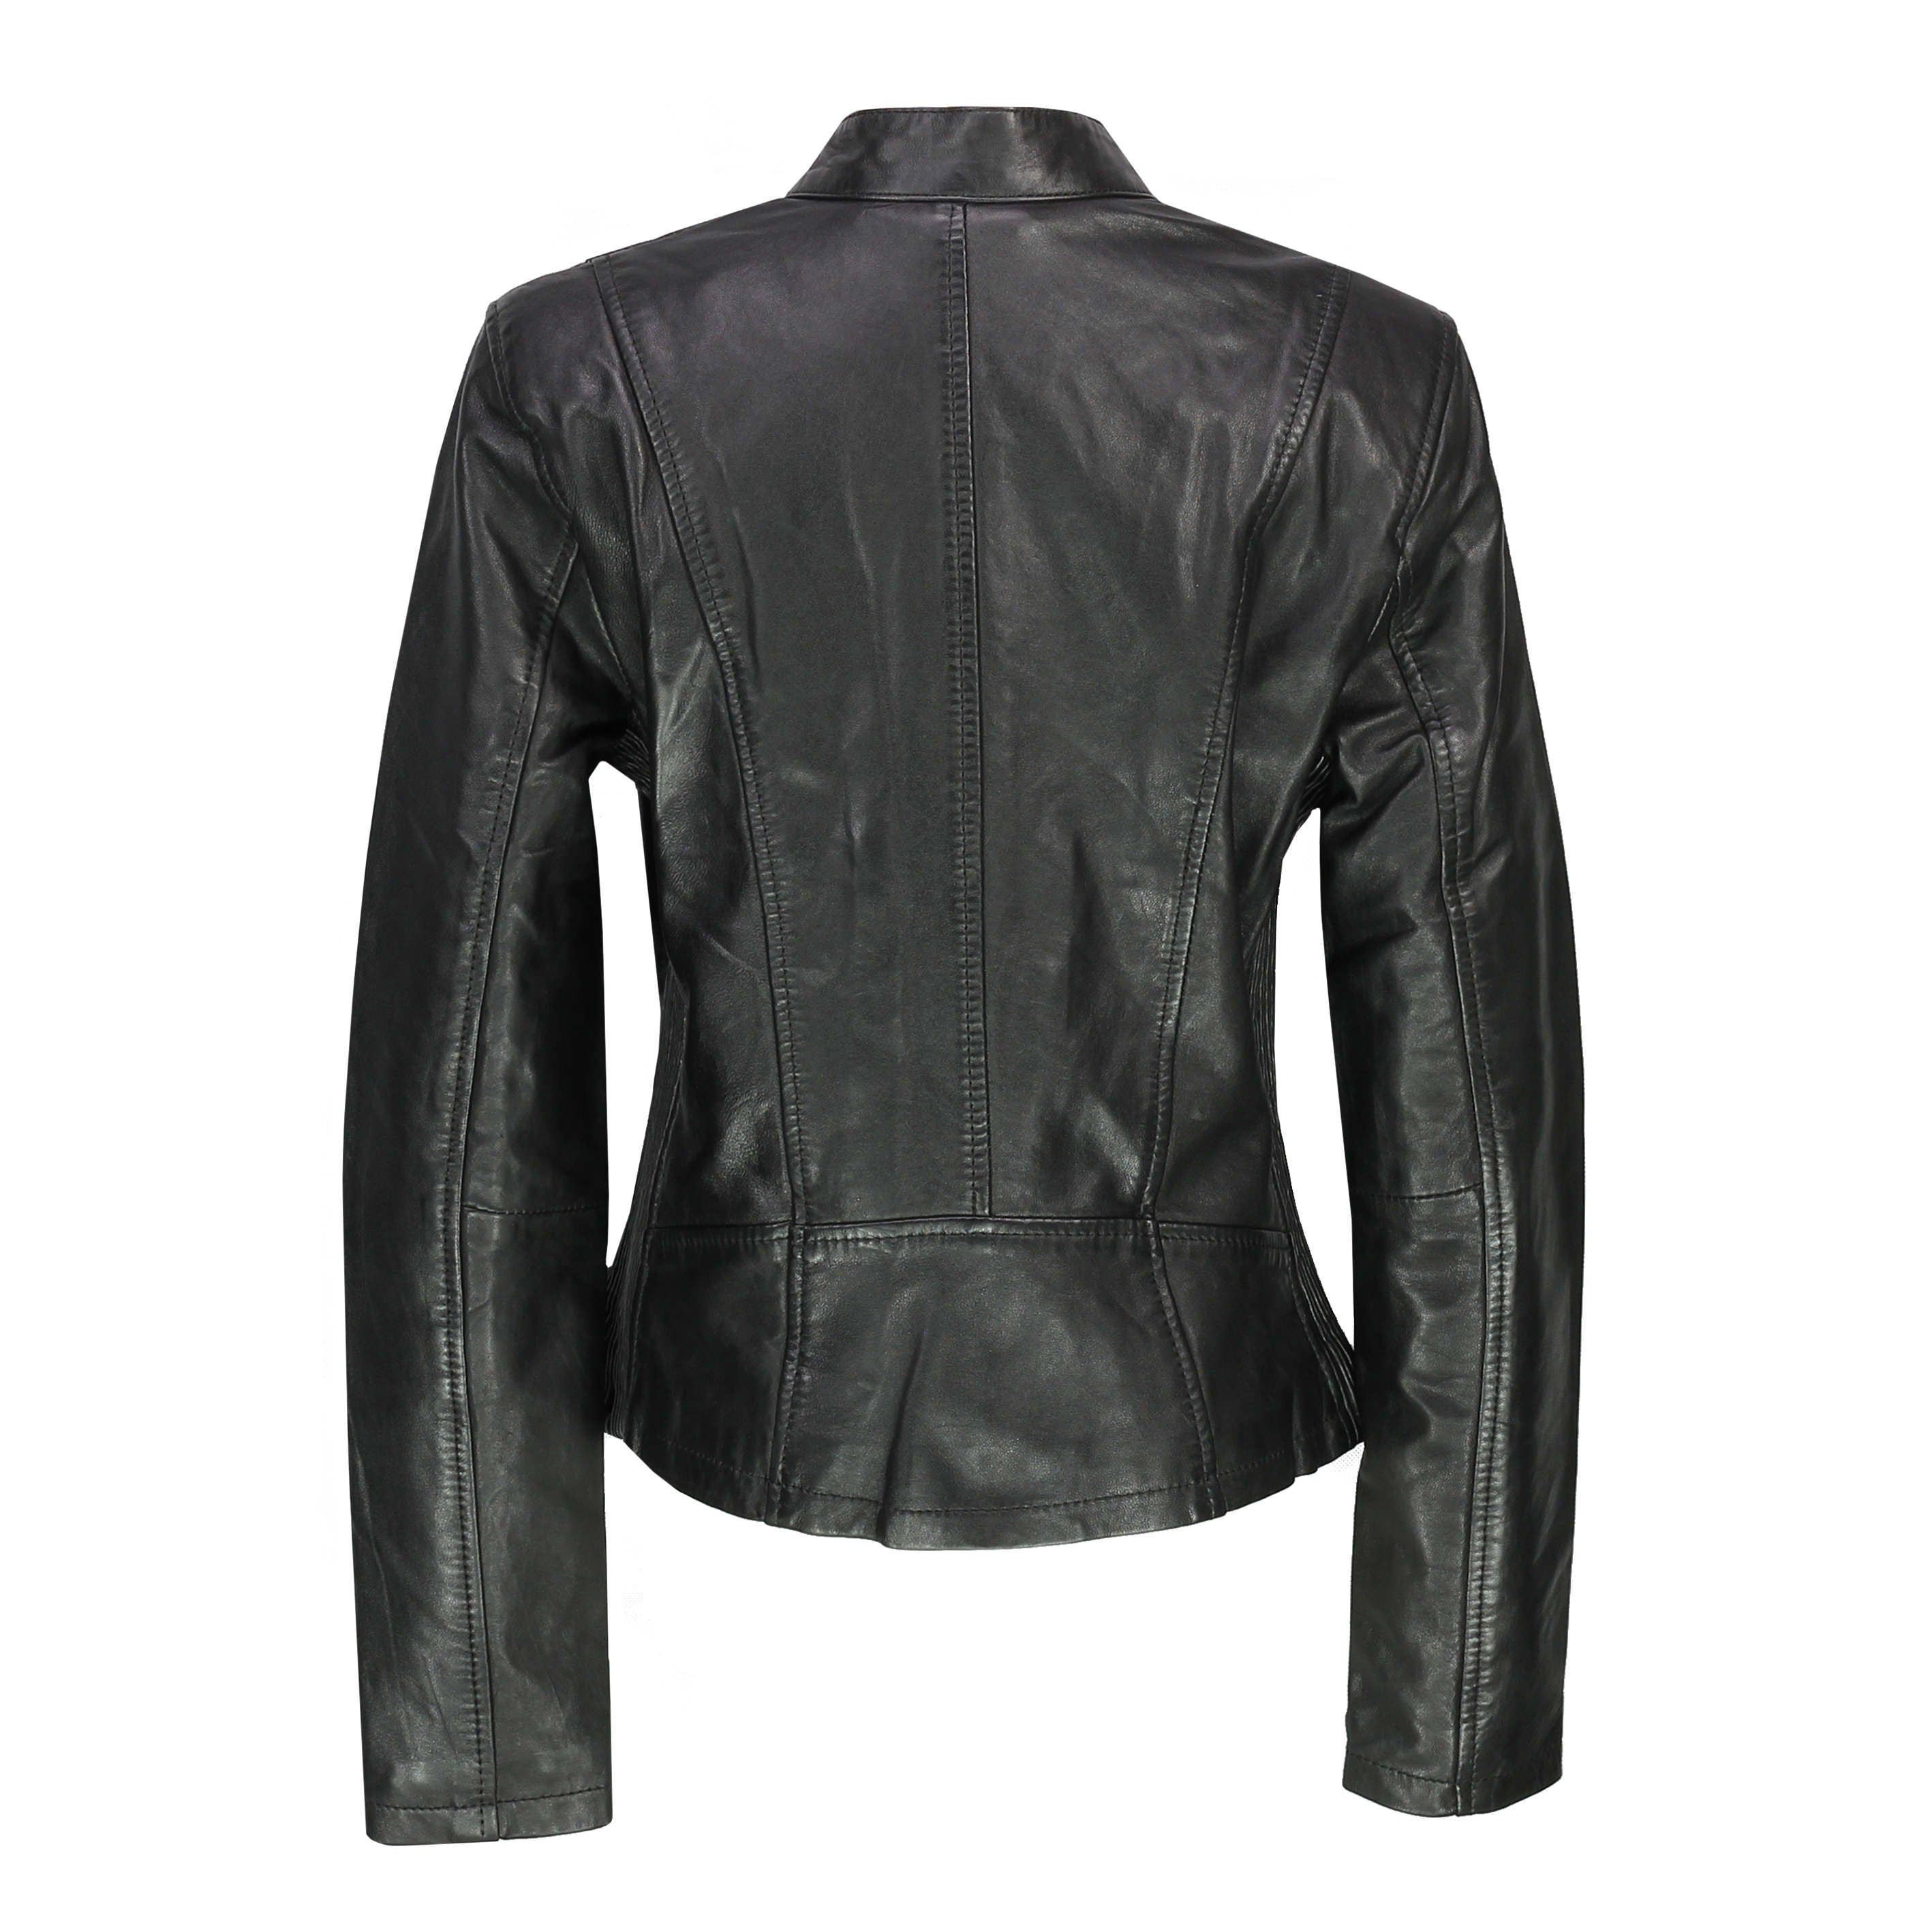 WOMENS VINTAGE REAL LEATHER JACKET